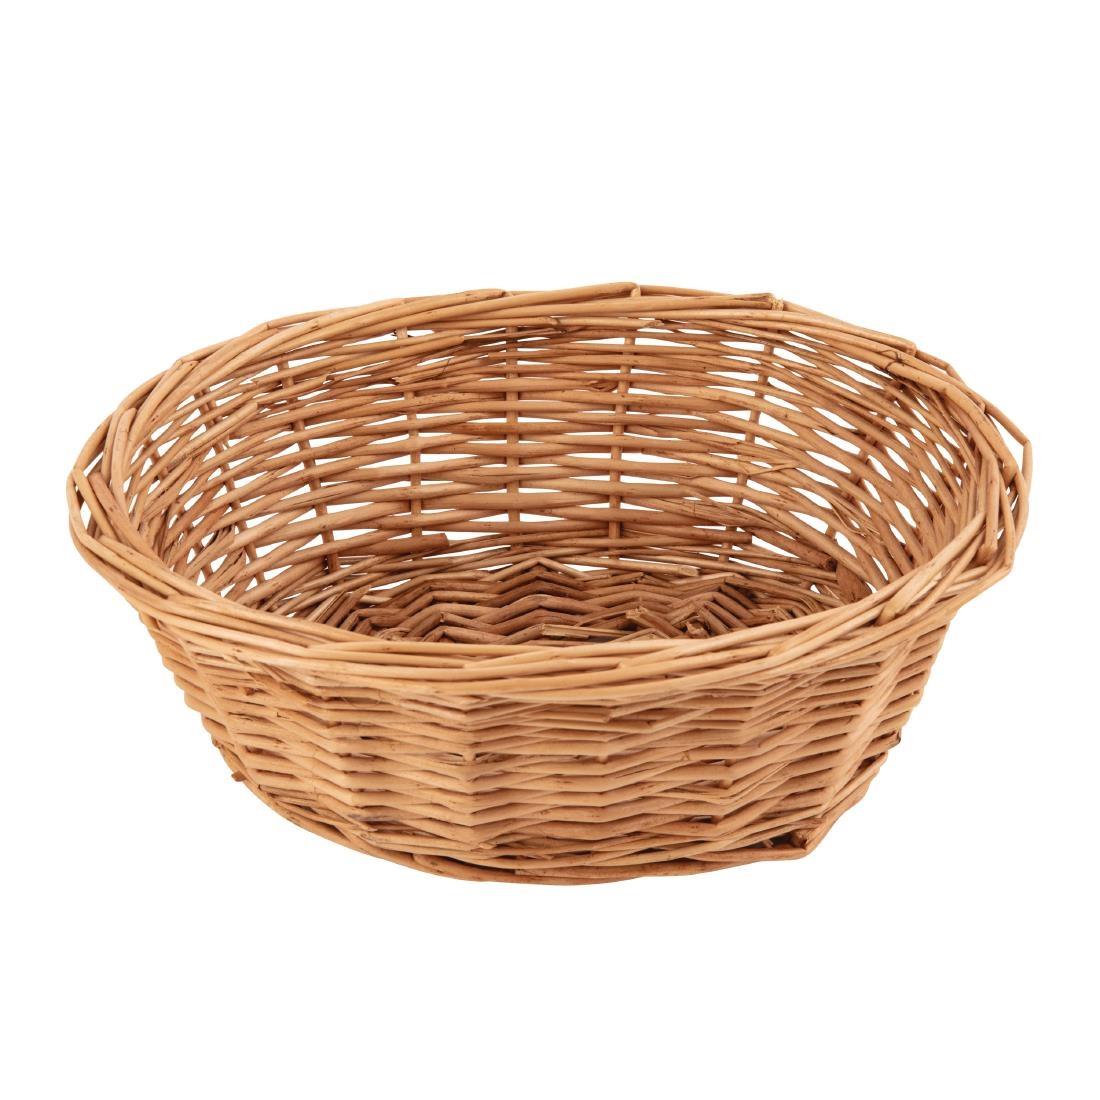 Willow Oval Basket - P764  - 2